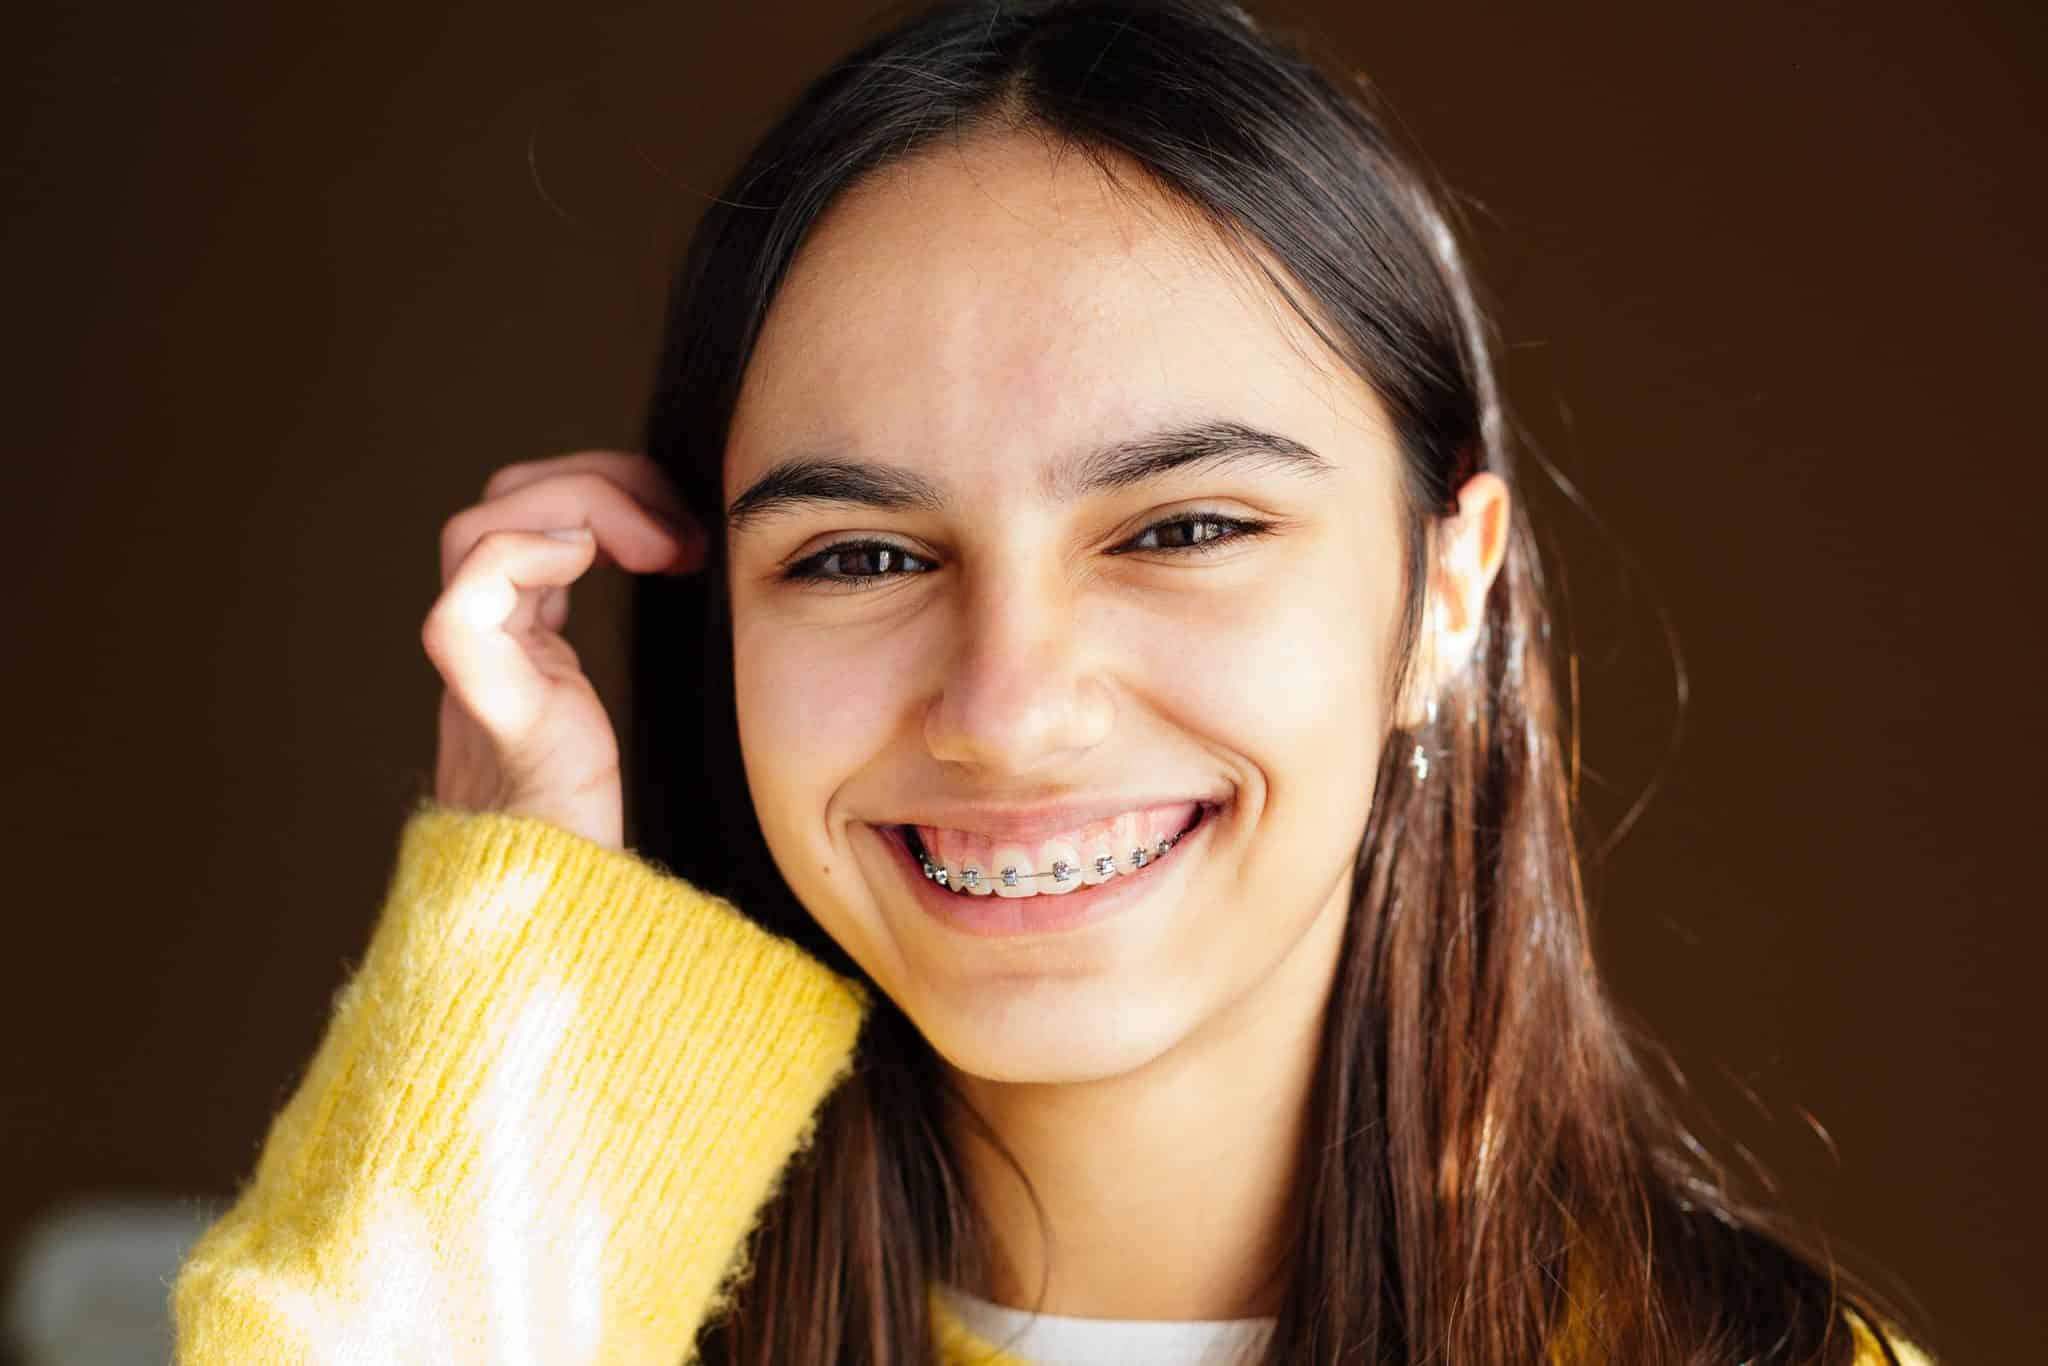 A photo of a woman with traditional metal braces wearing a yellow sweater